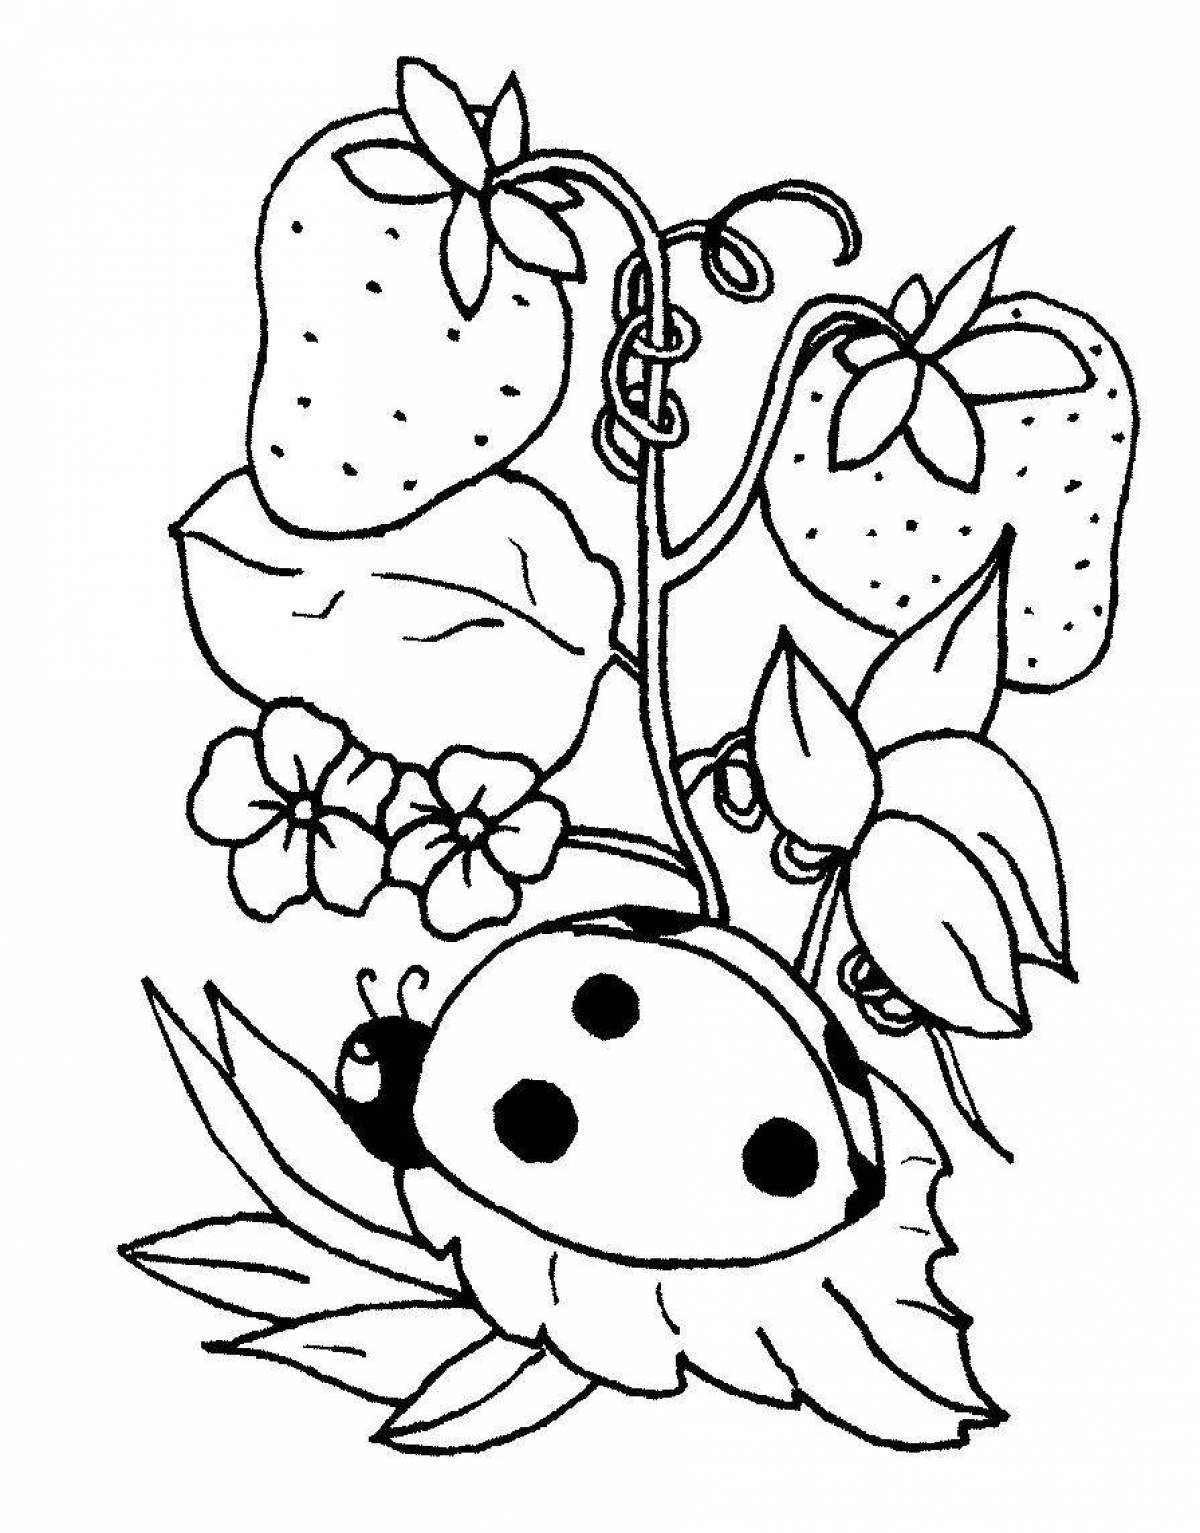 Exciting coloring pages blogspot com